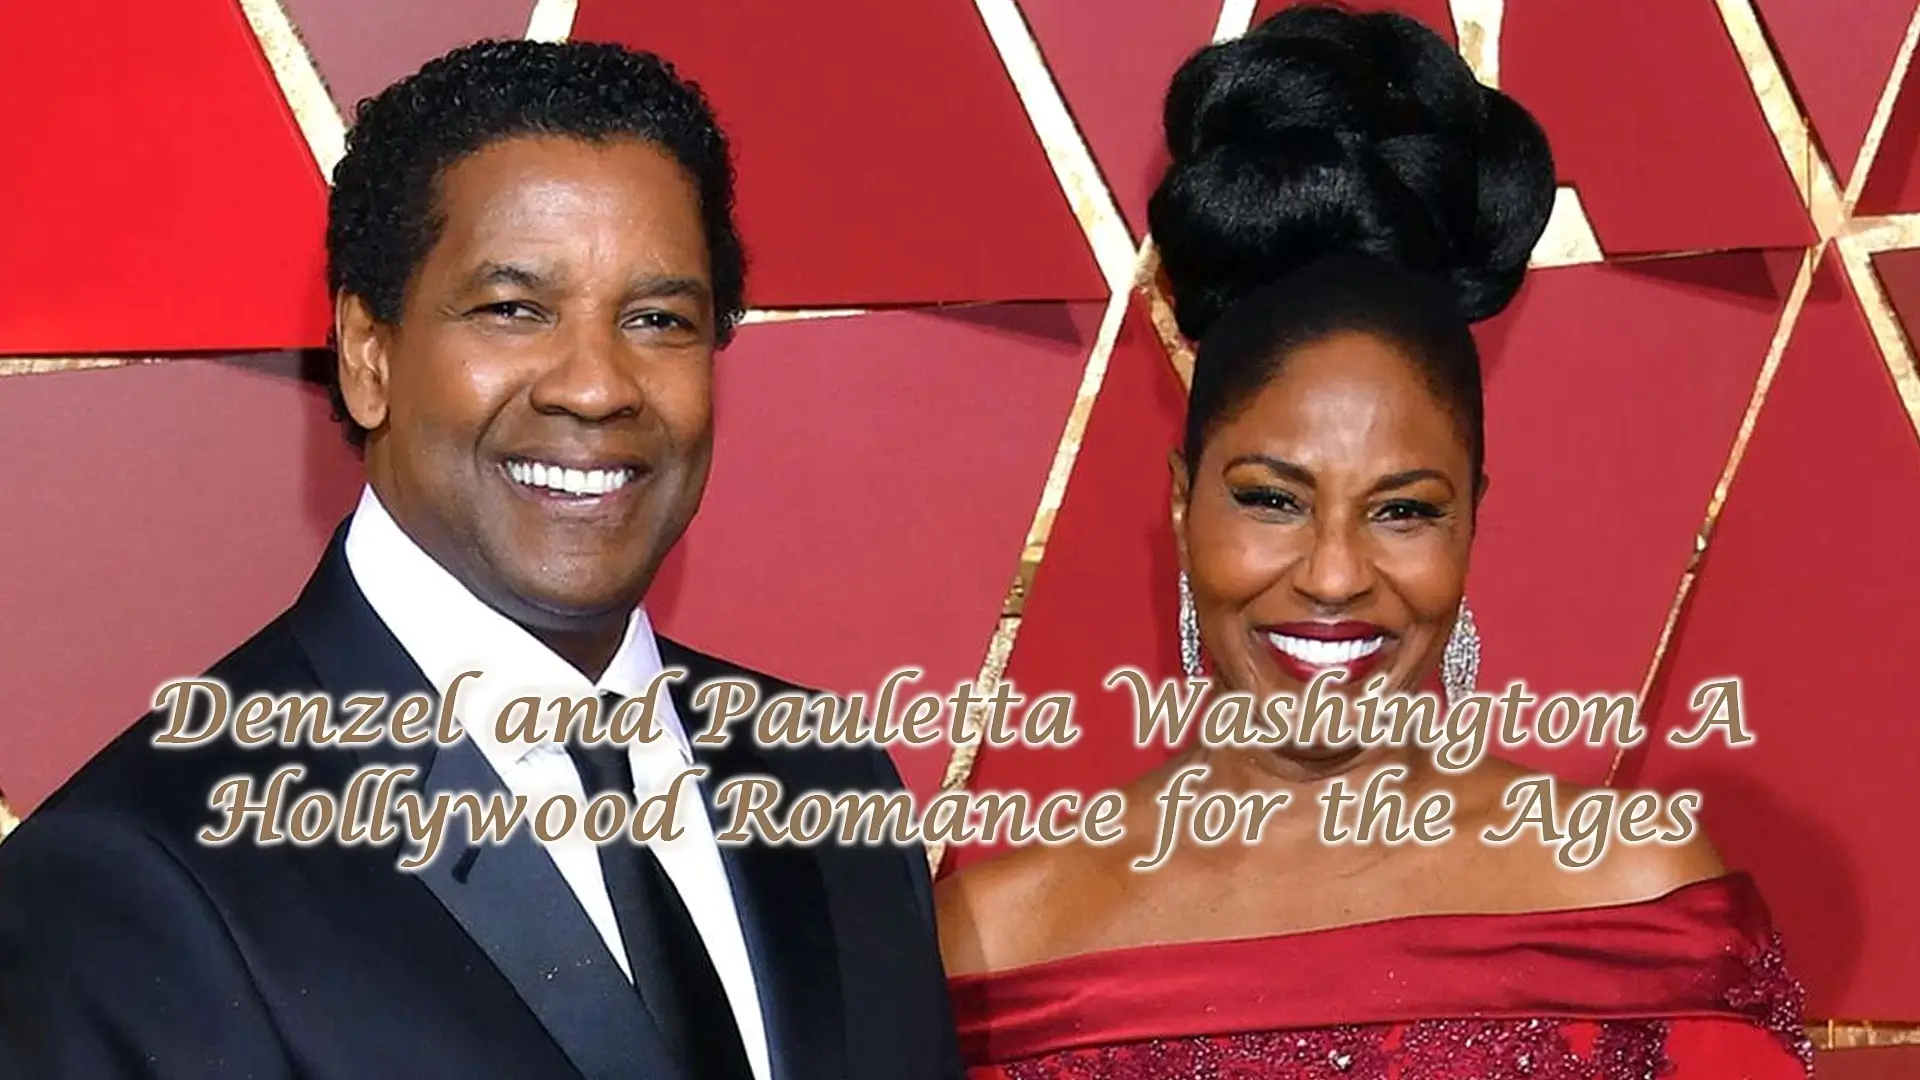 Denzel and Pauletta Washington A Hollywood Romance for the Ages